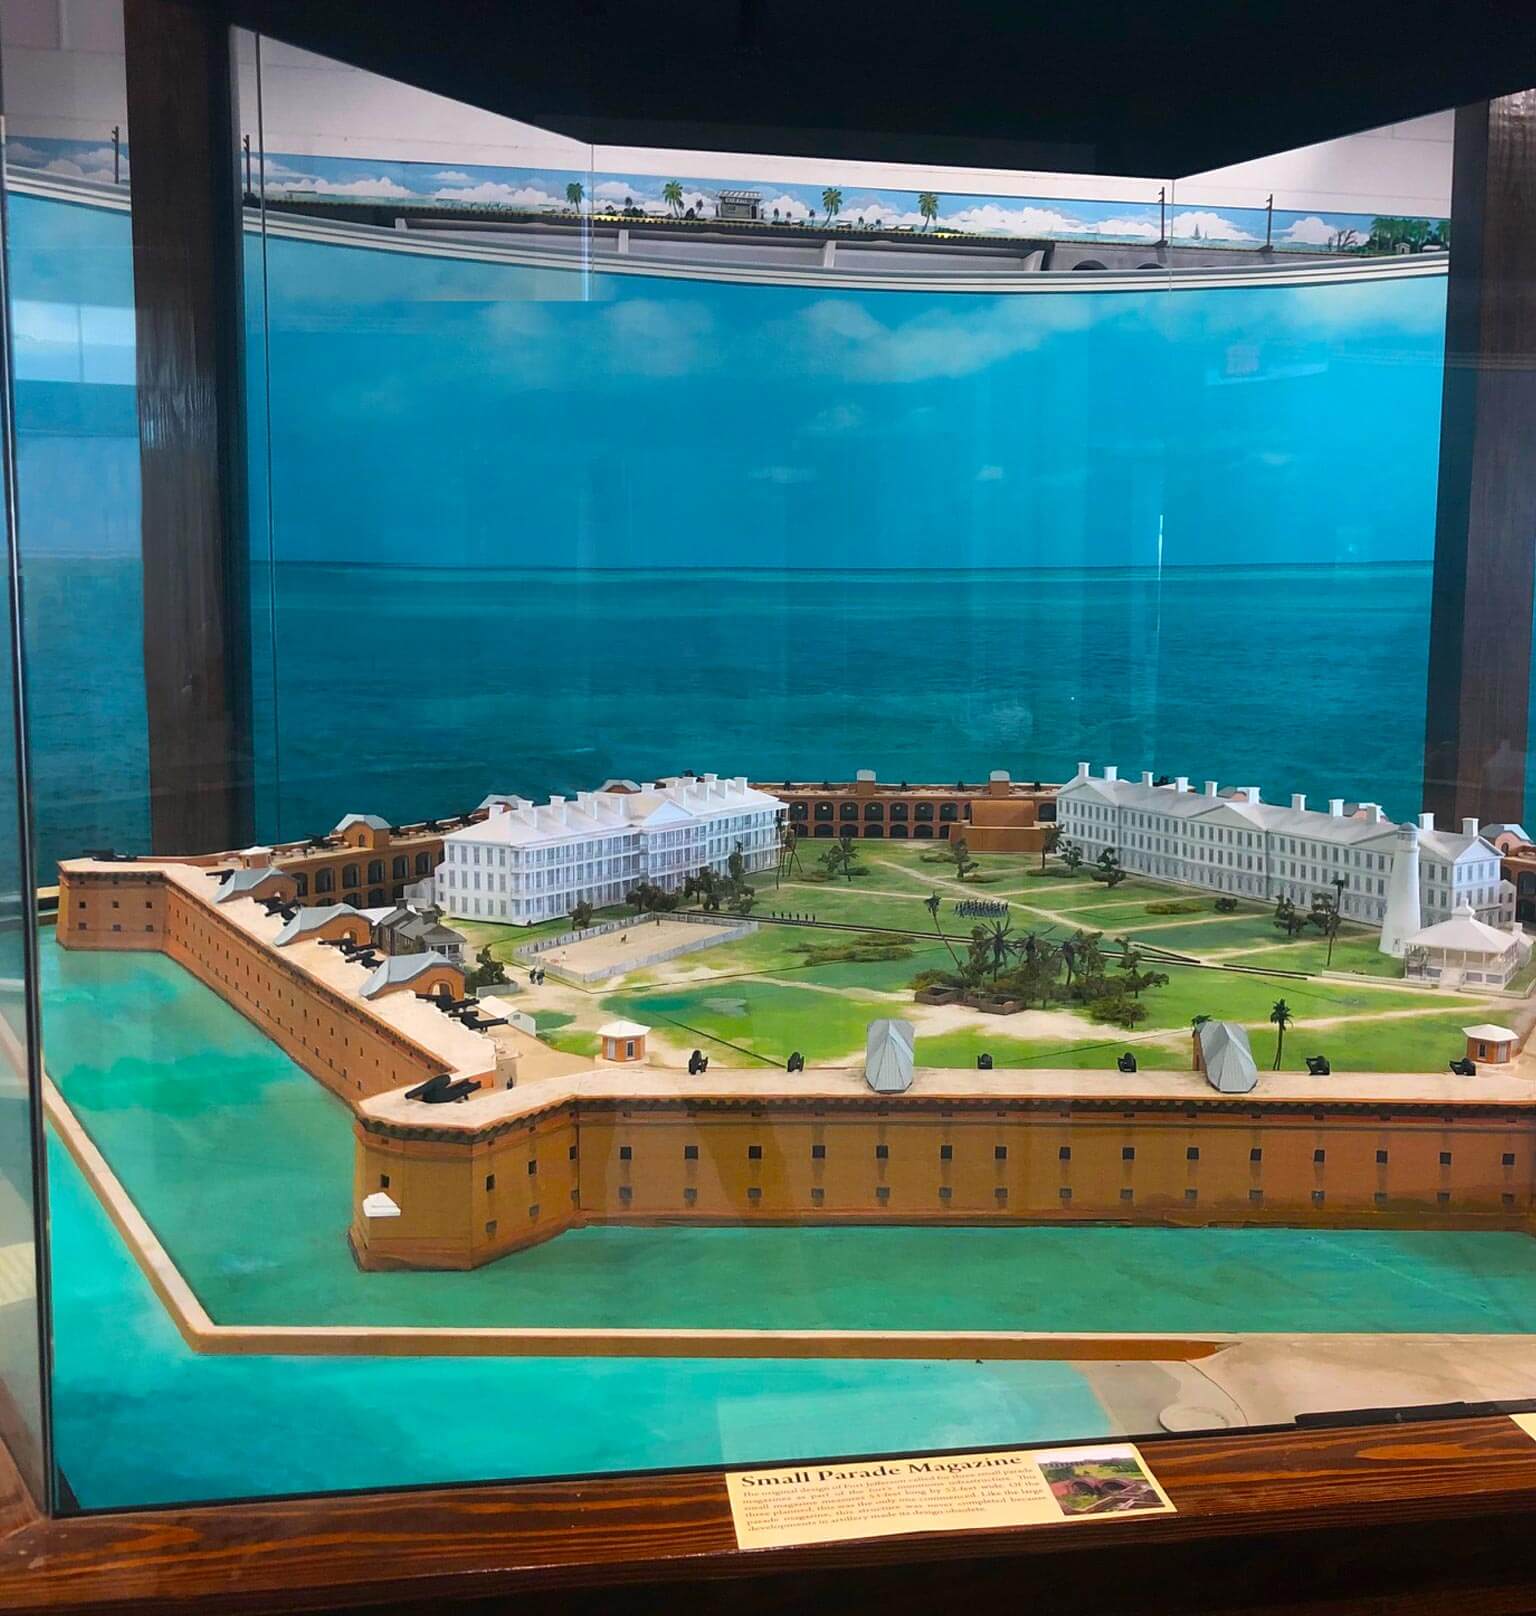 Photo of the Fort Jefferson 3D model on display at the Dry Tortugas Museum - Tablet Version